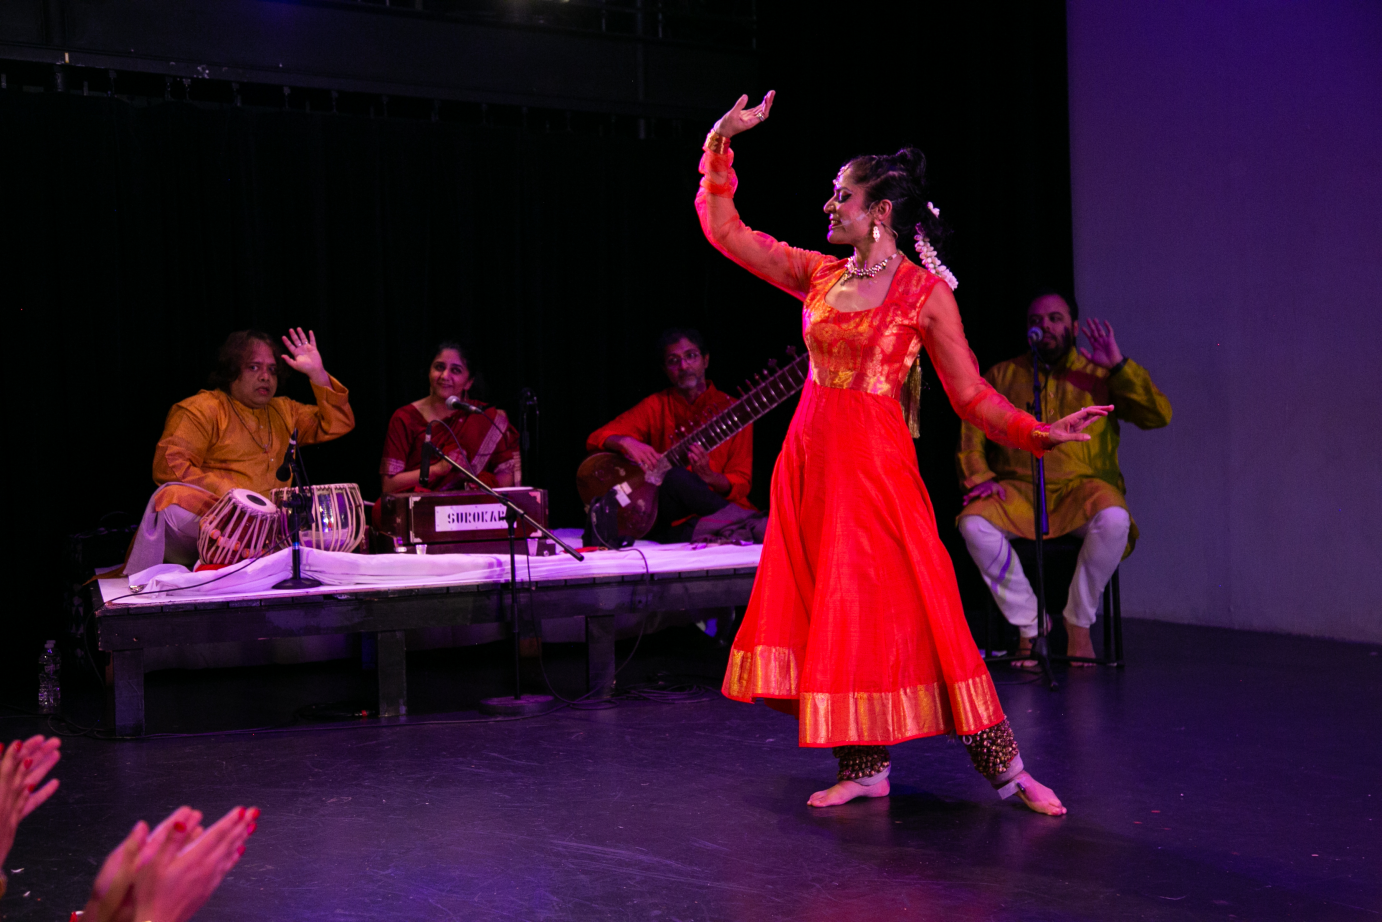 In front of the seated musicians, Rachna Nivas lifts one curved arm in the air. The other is curved to the side. Her body faces front, but her face is in profile.